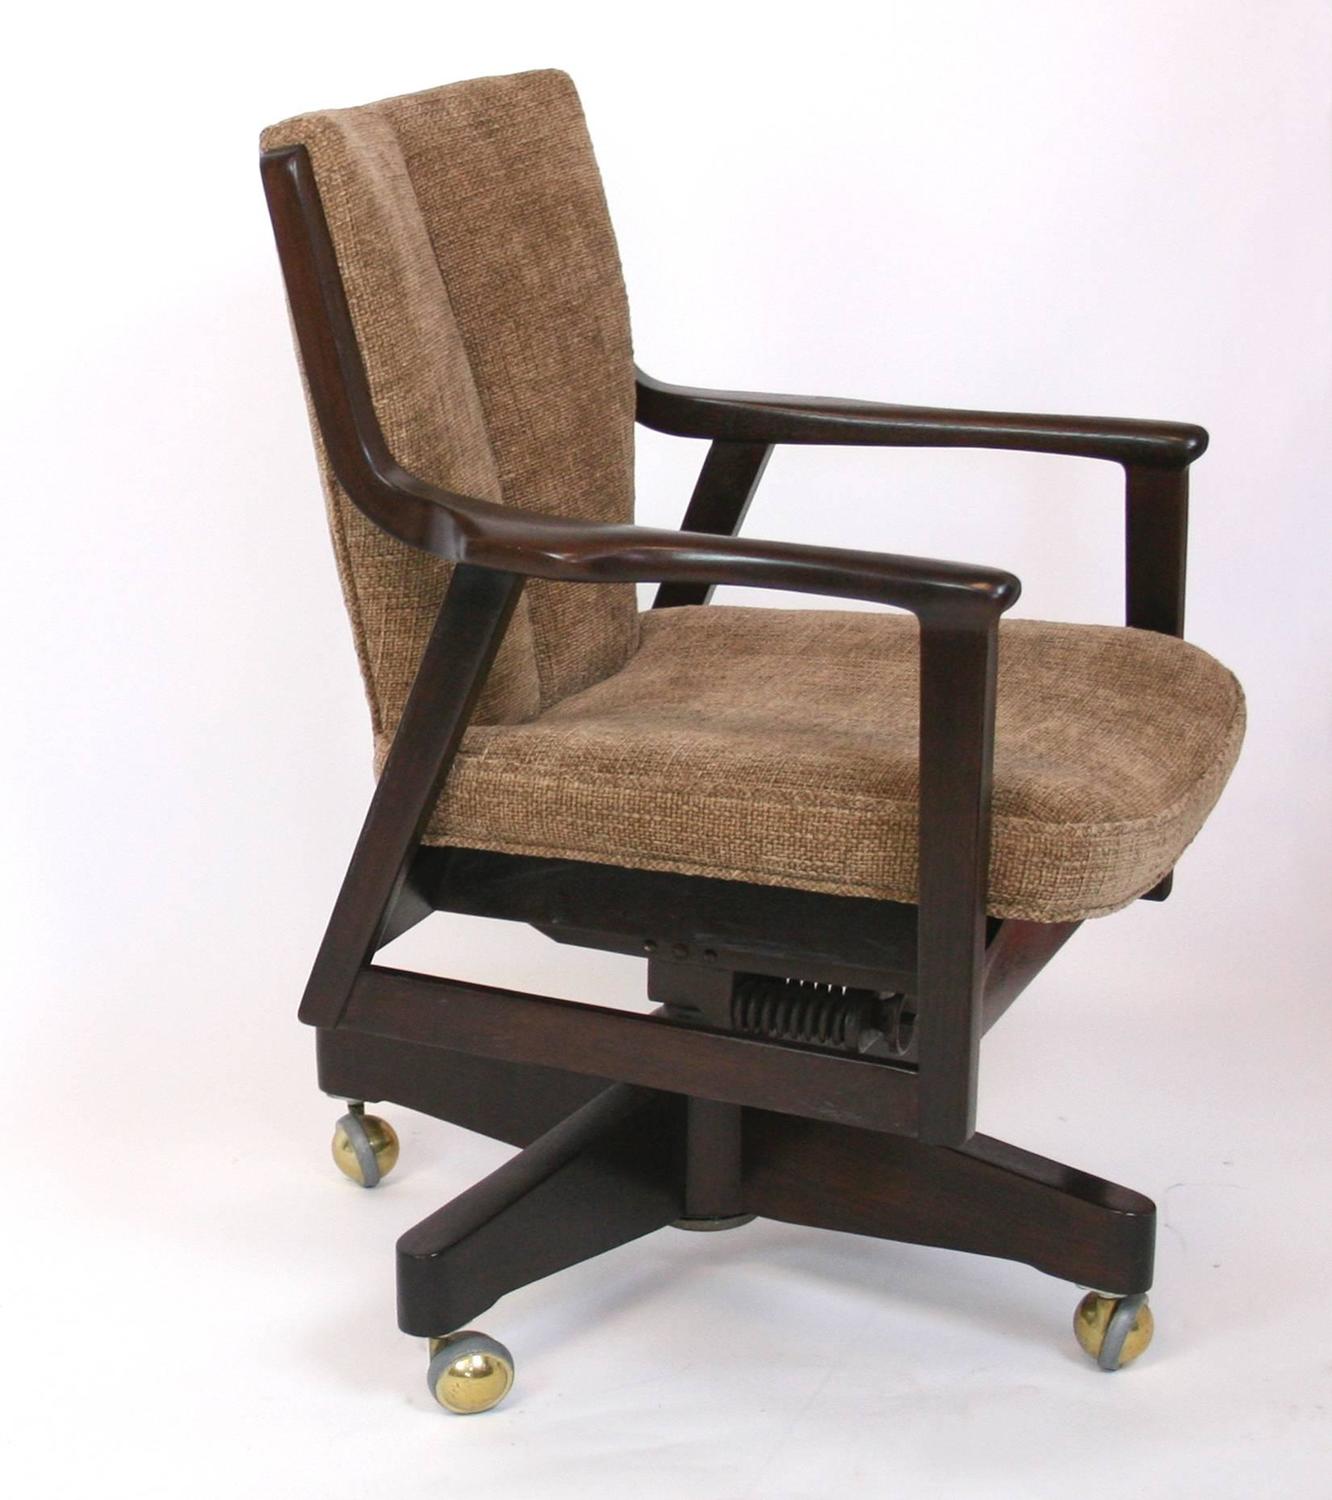 Mid-Century Modern Desk Chair For Sale at 1stdibs